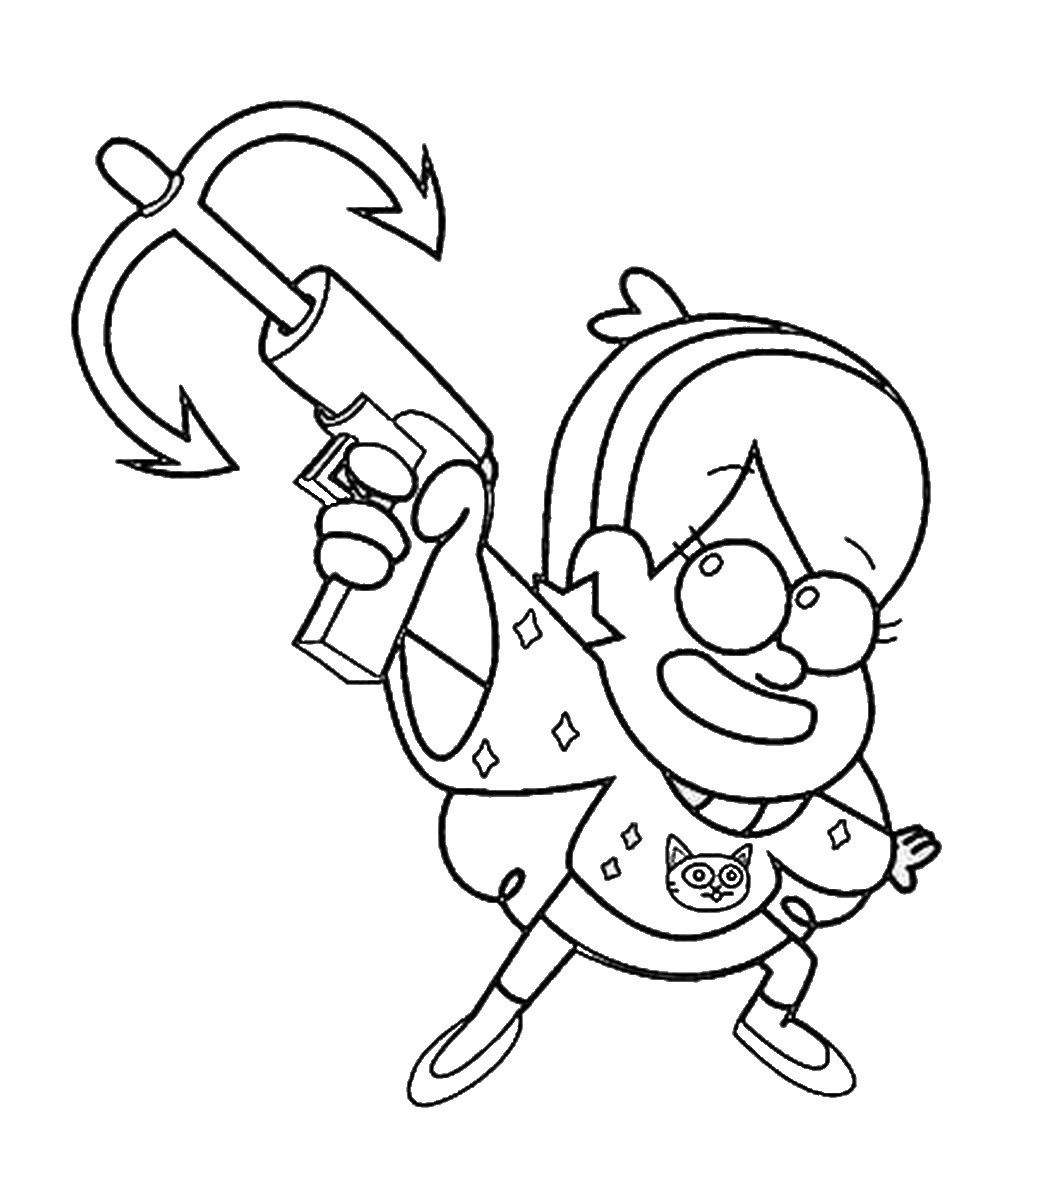 gravity falls coloring pages to print